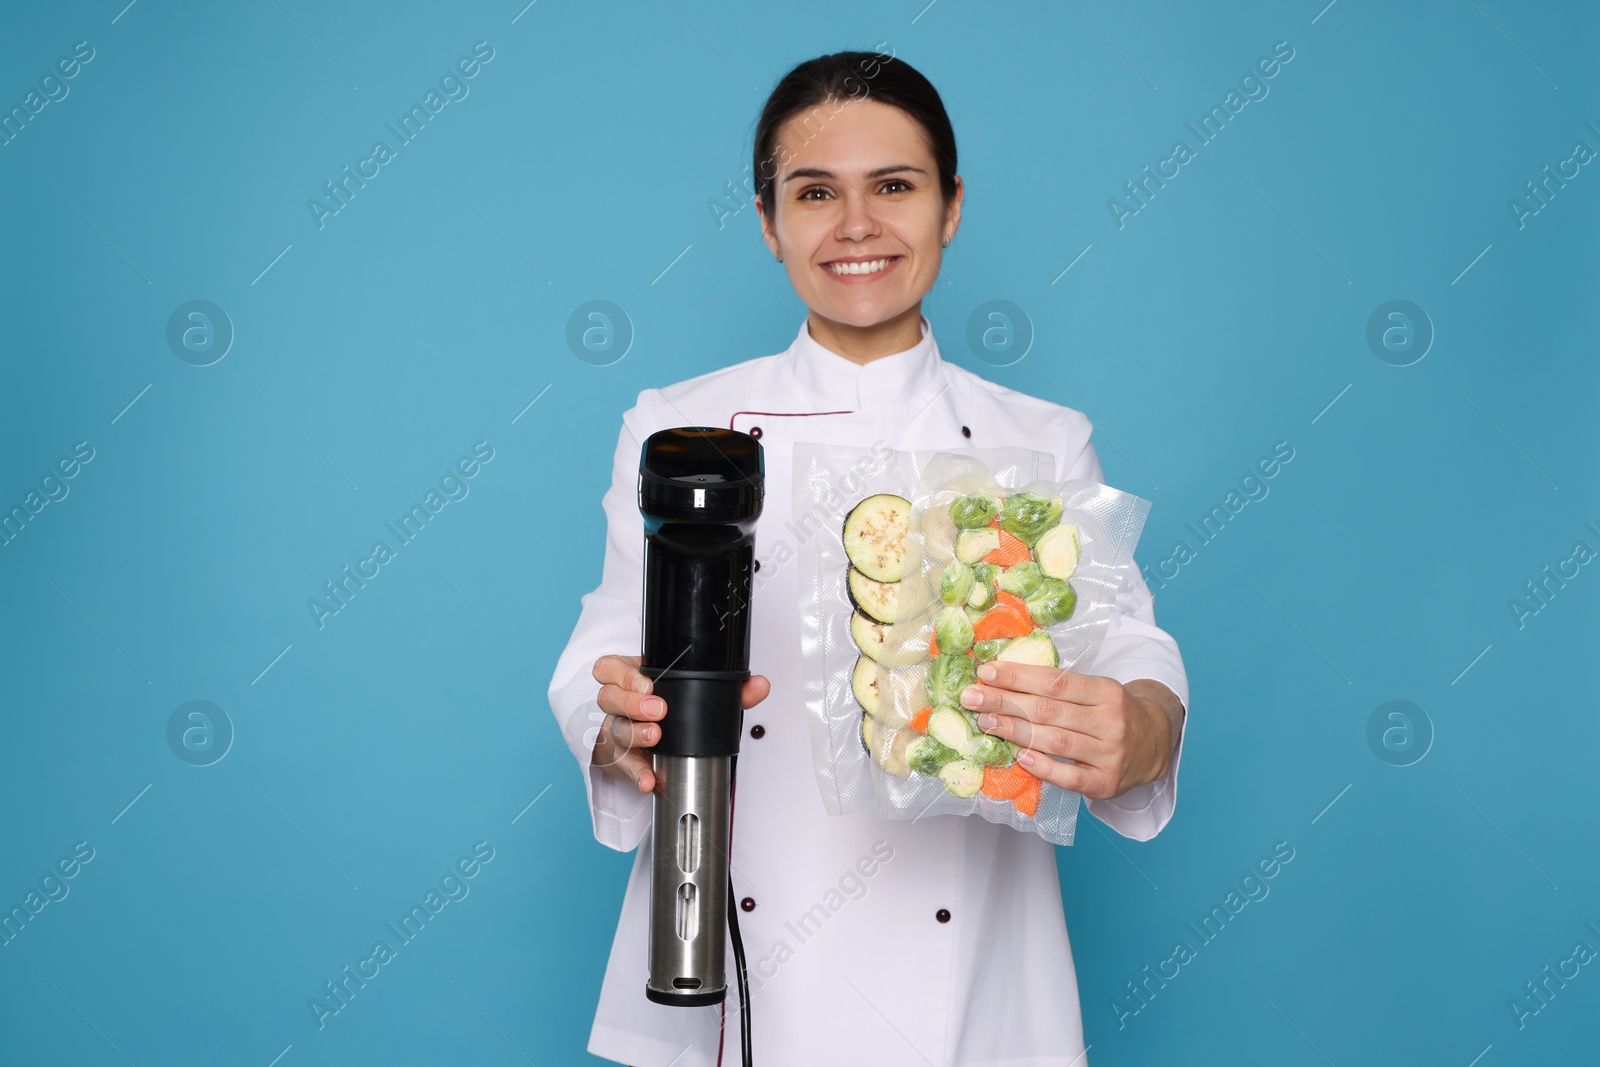 Photo of Chef holding sous vide cooker and vegetables in vacuum packs on light blue background